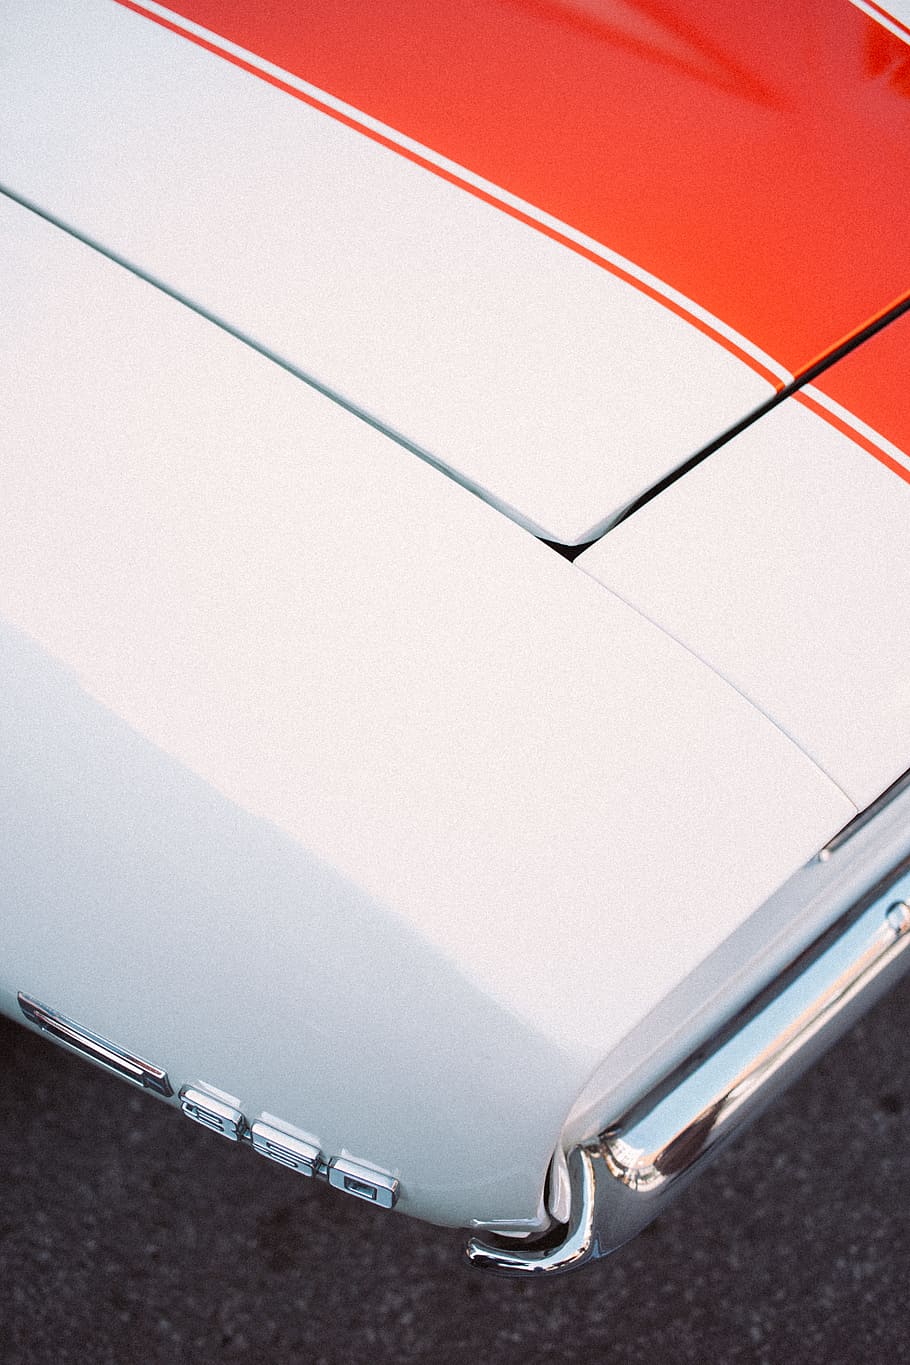 white and red metal part on gray surface, car, bonnet, hood, muscle car, HD wallpaper